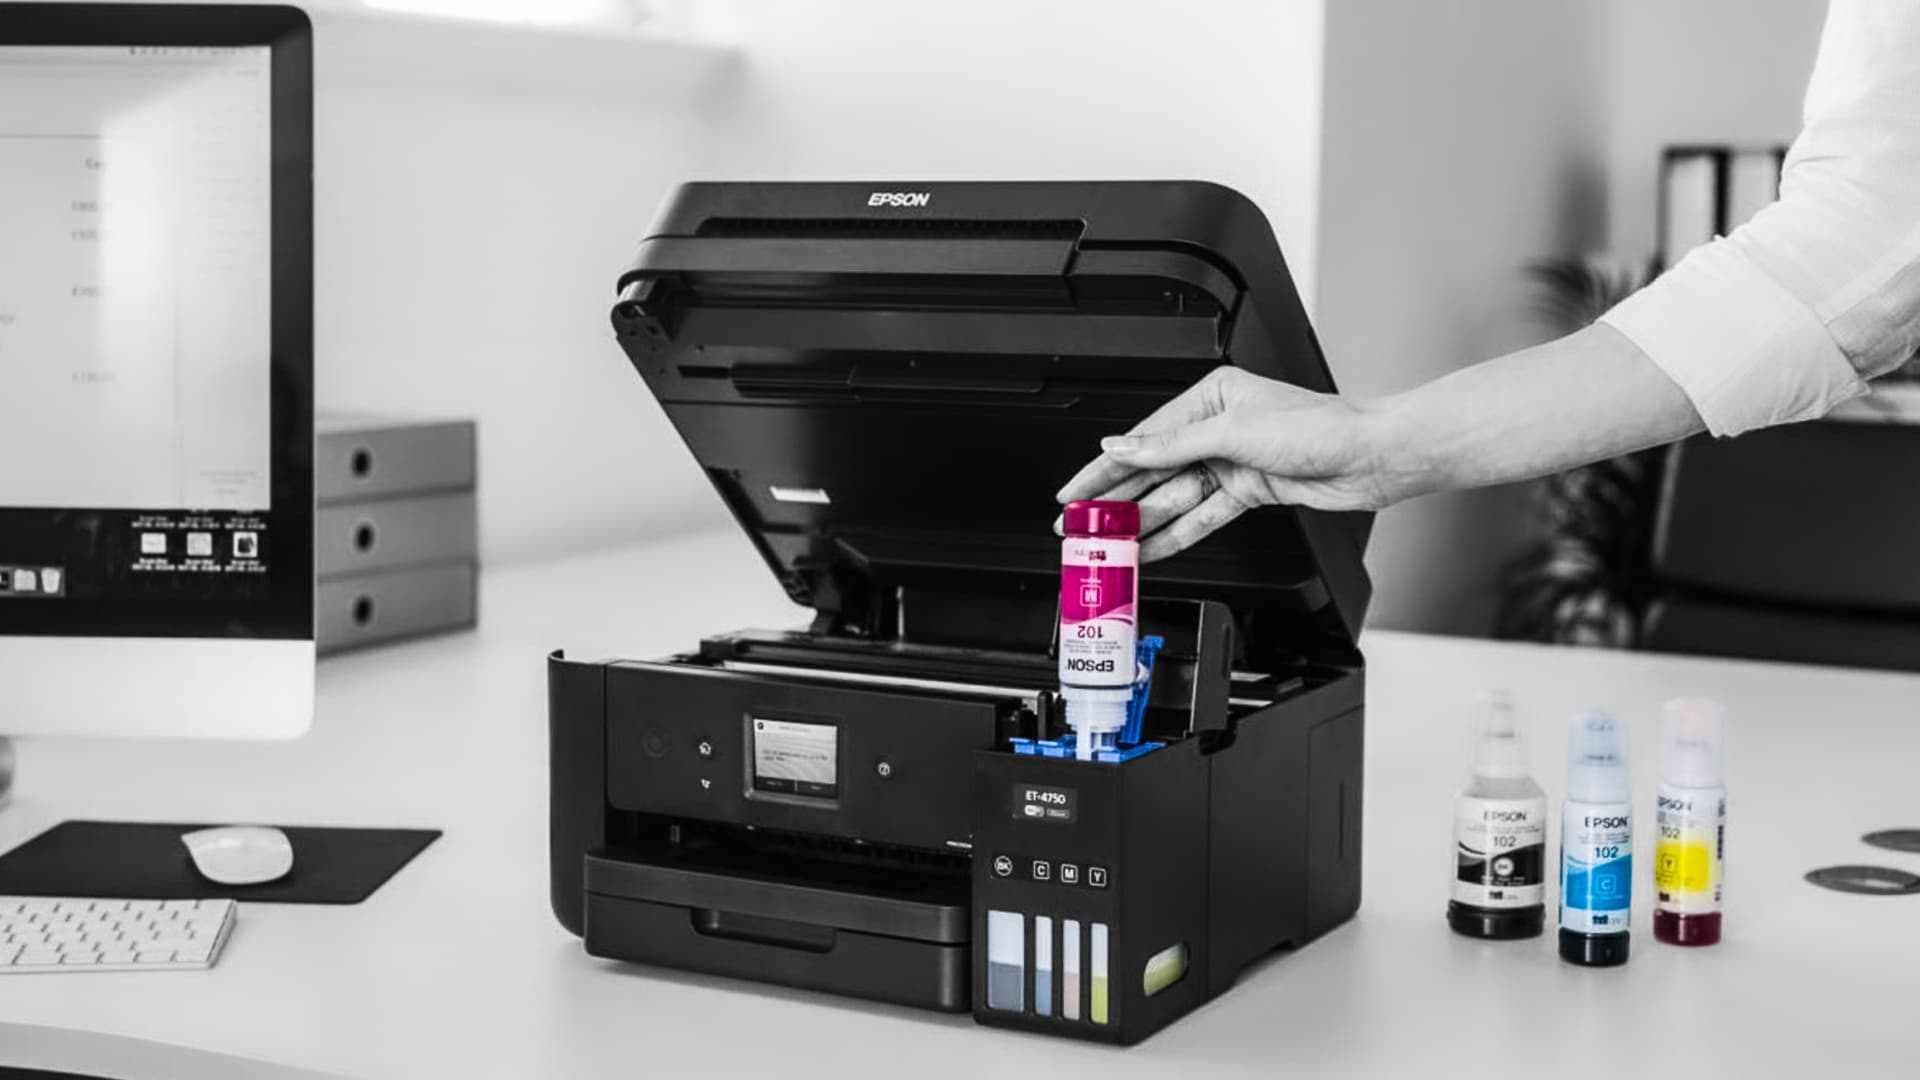 How to Know the Ink Level of Epson Printers?